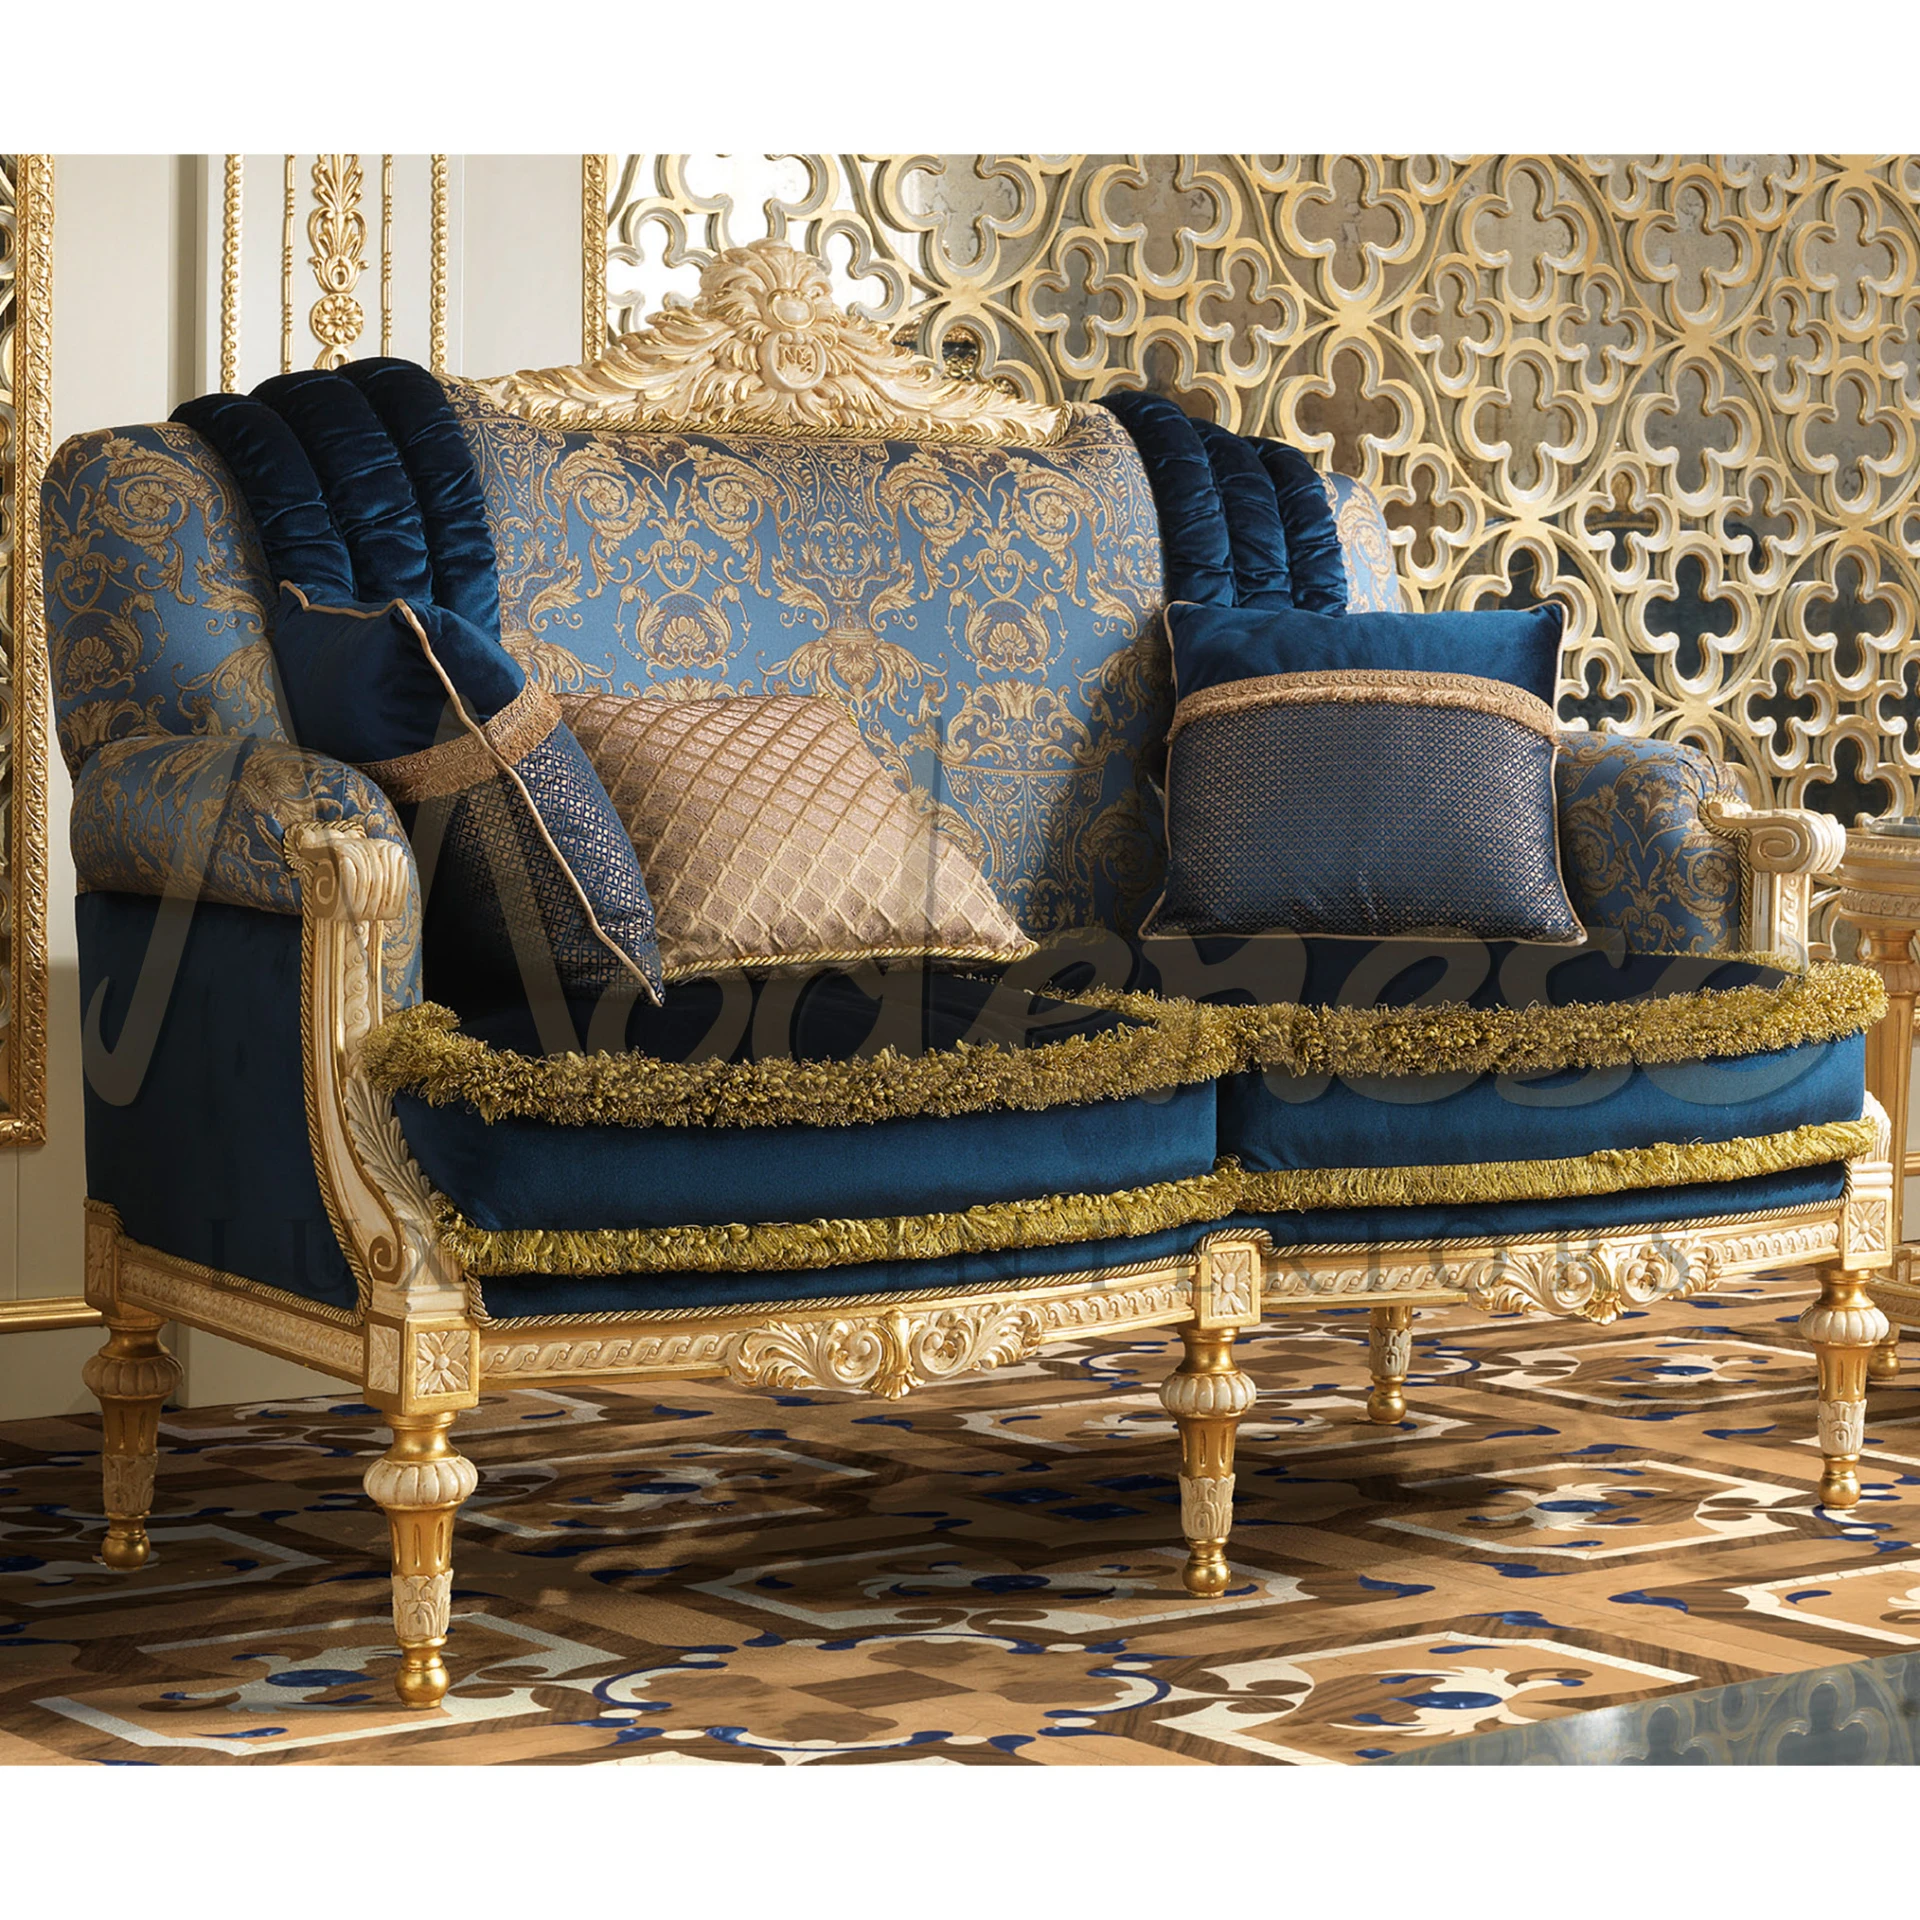 Elevate your interior design with the Modenese Furniture Venetian Sofa, a masterpiece of Italian craftsmanship. 